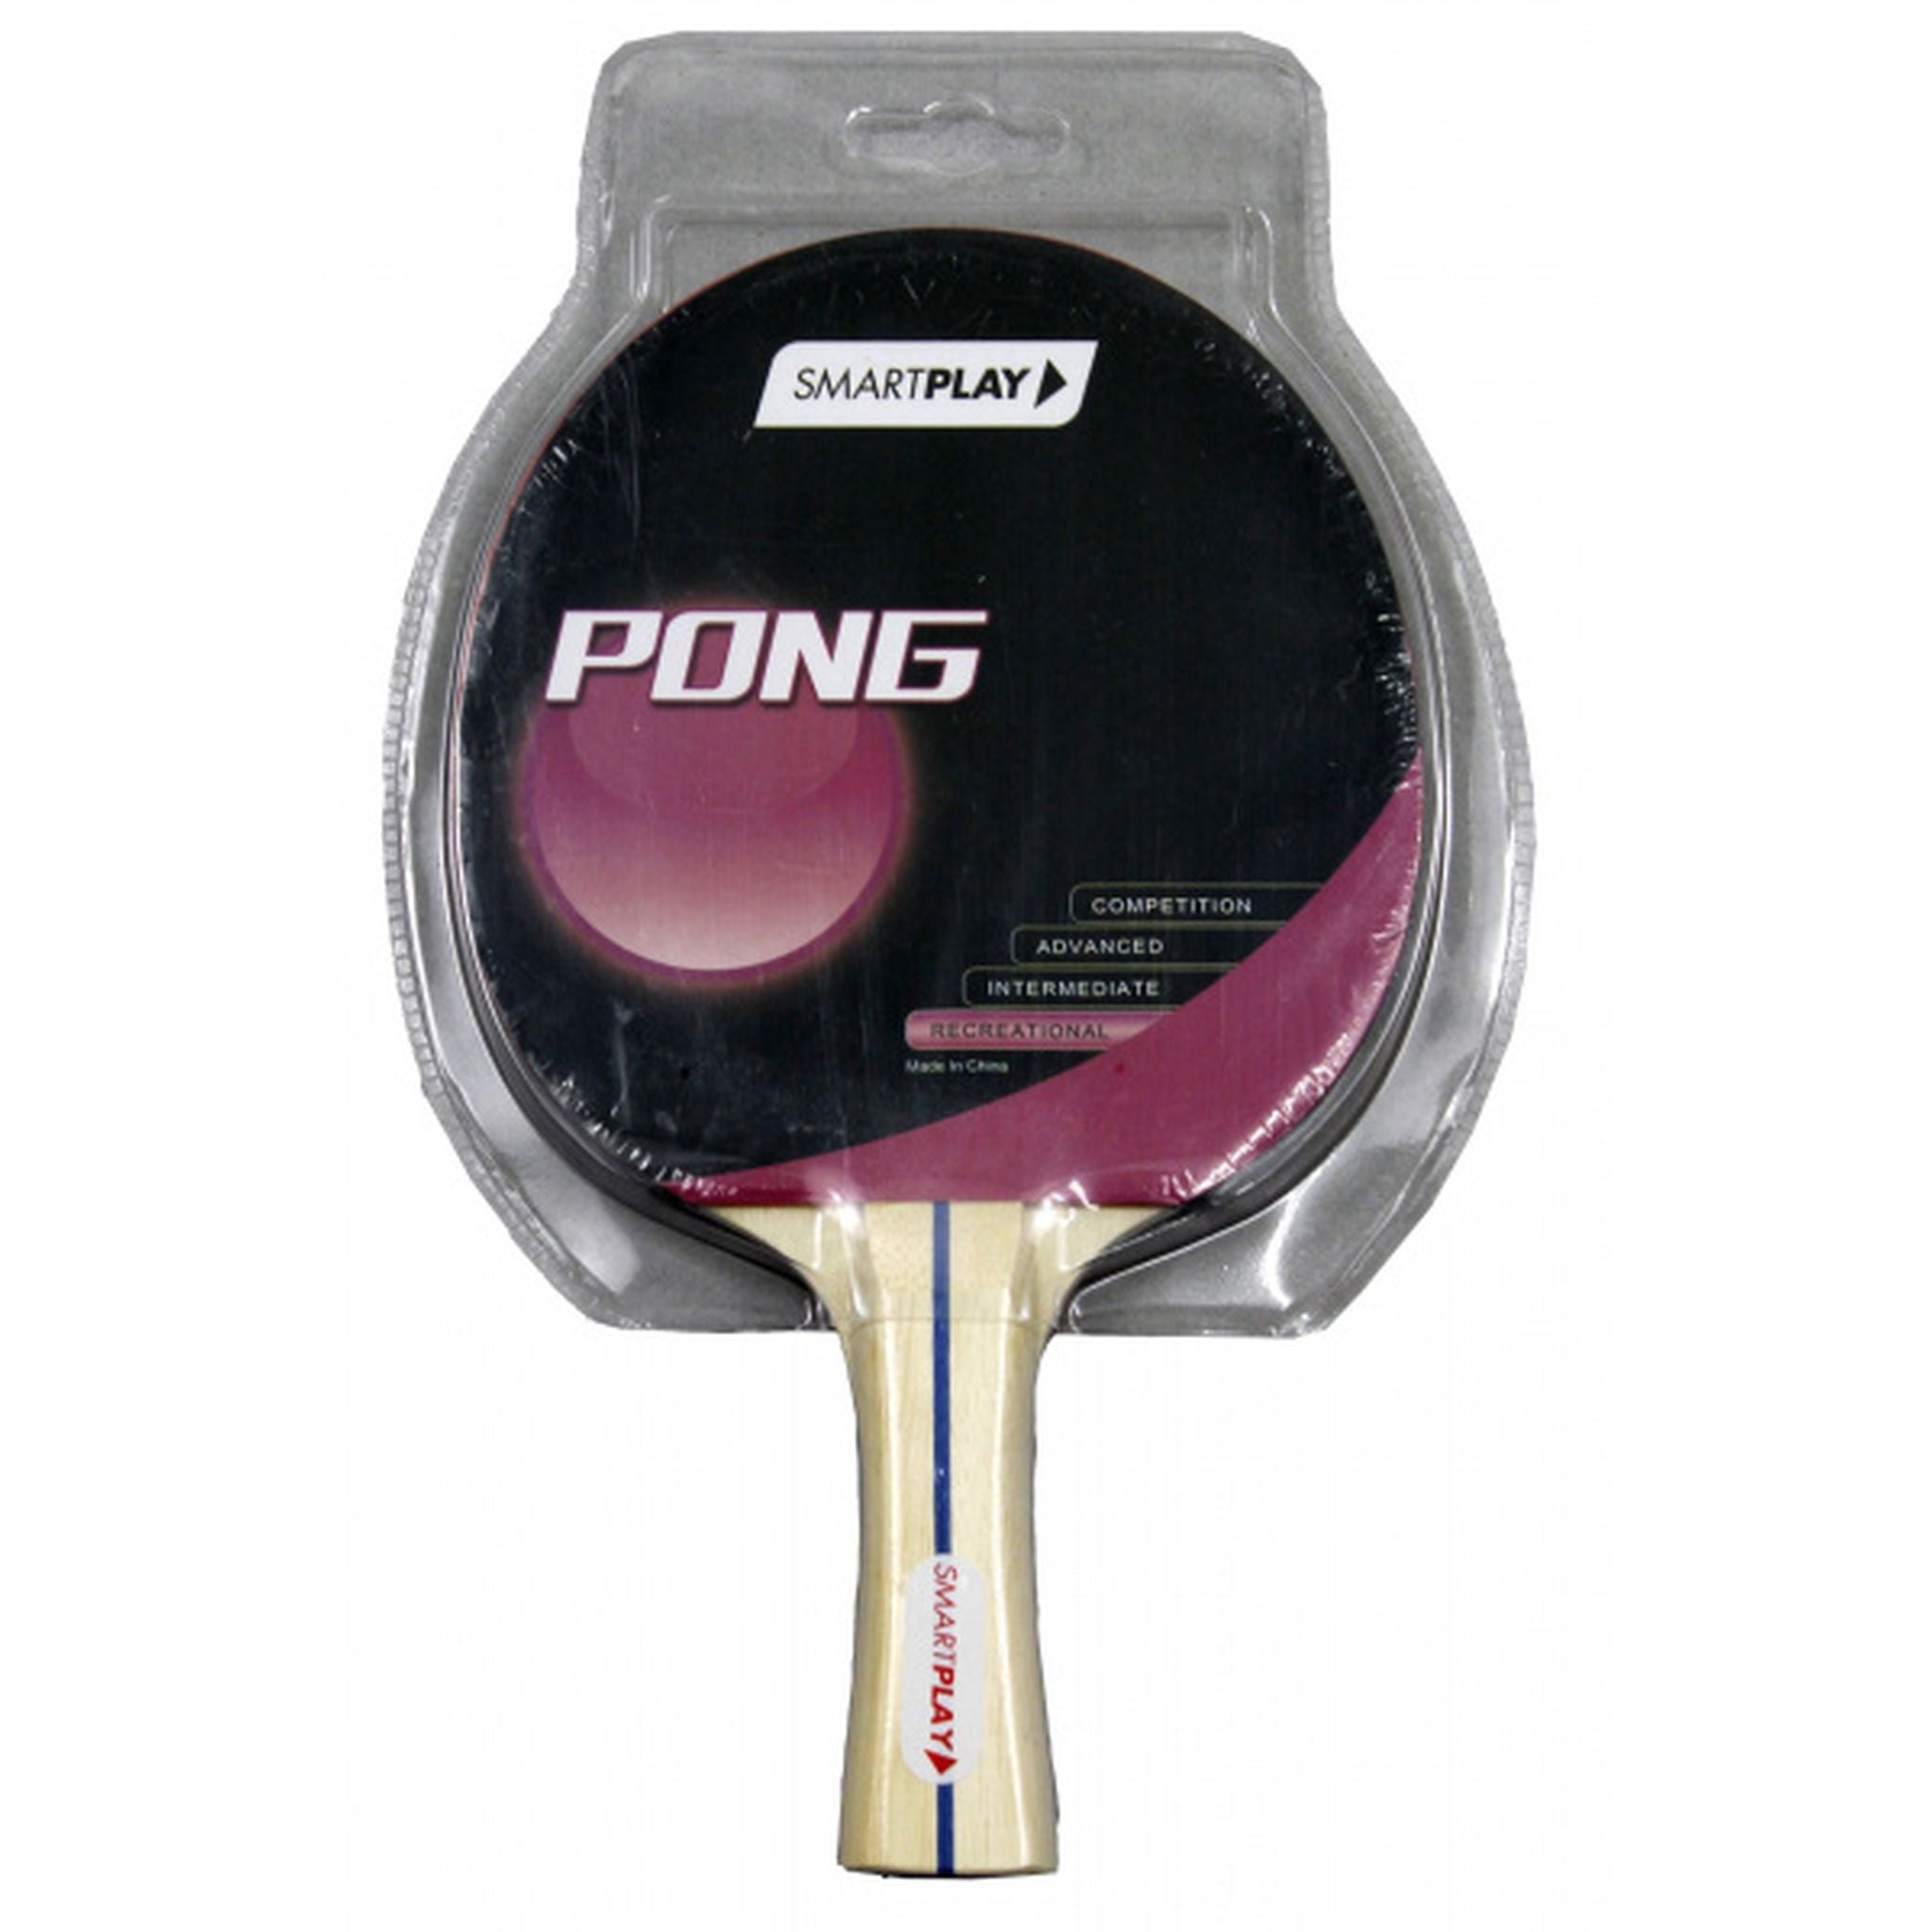 SMARTPLAY PONG Pimple IN Recreational Table Tennis Bat